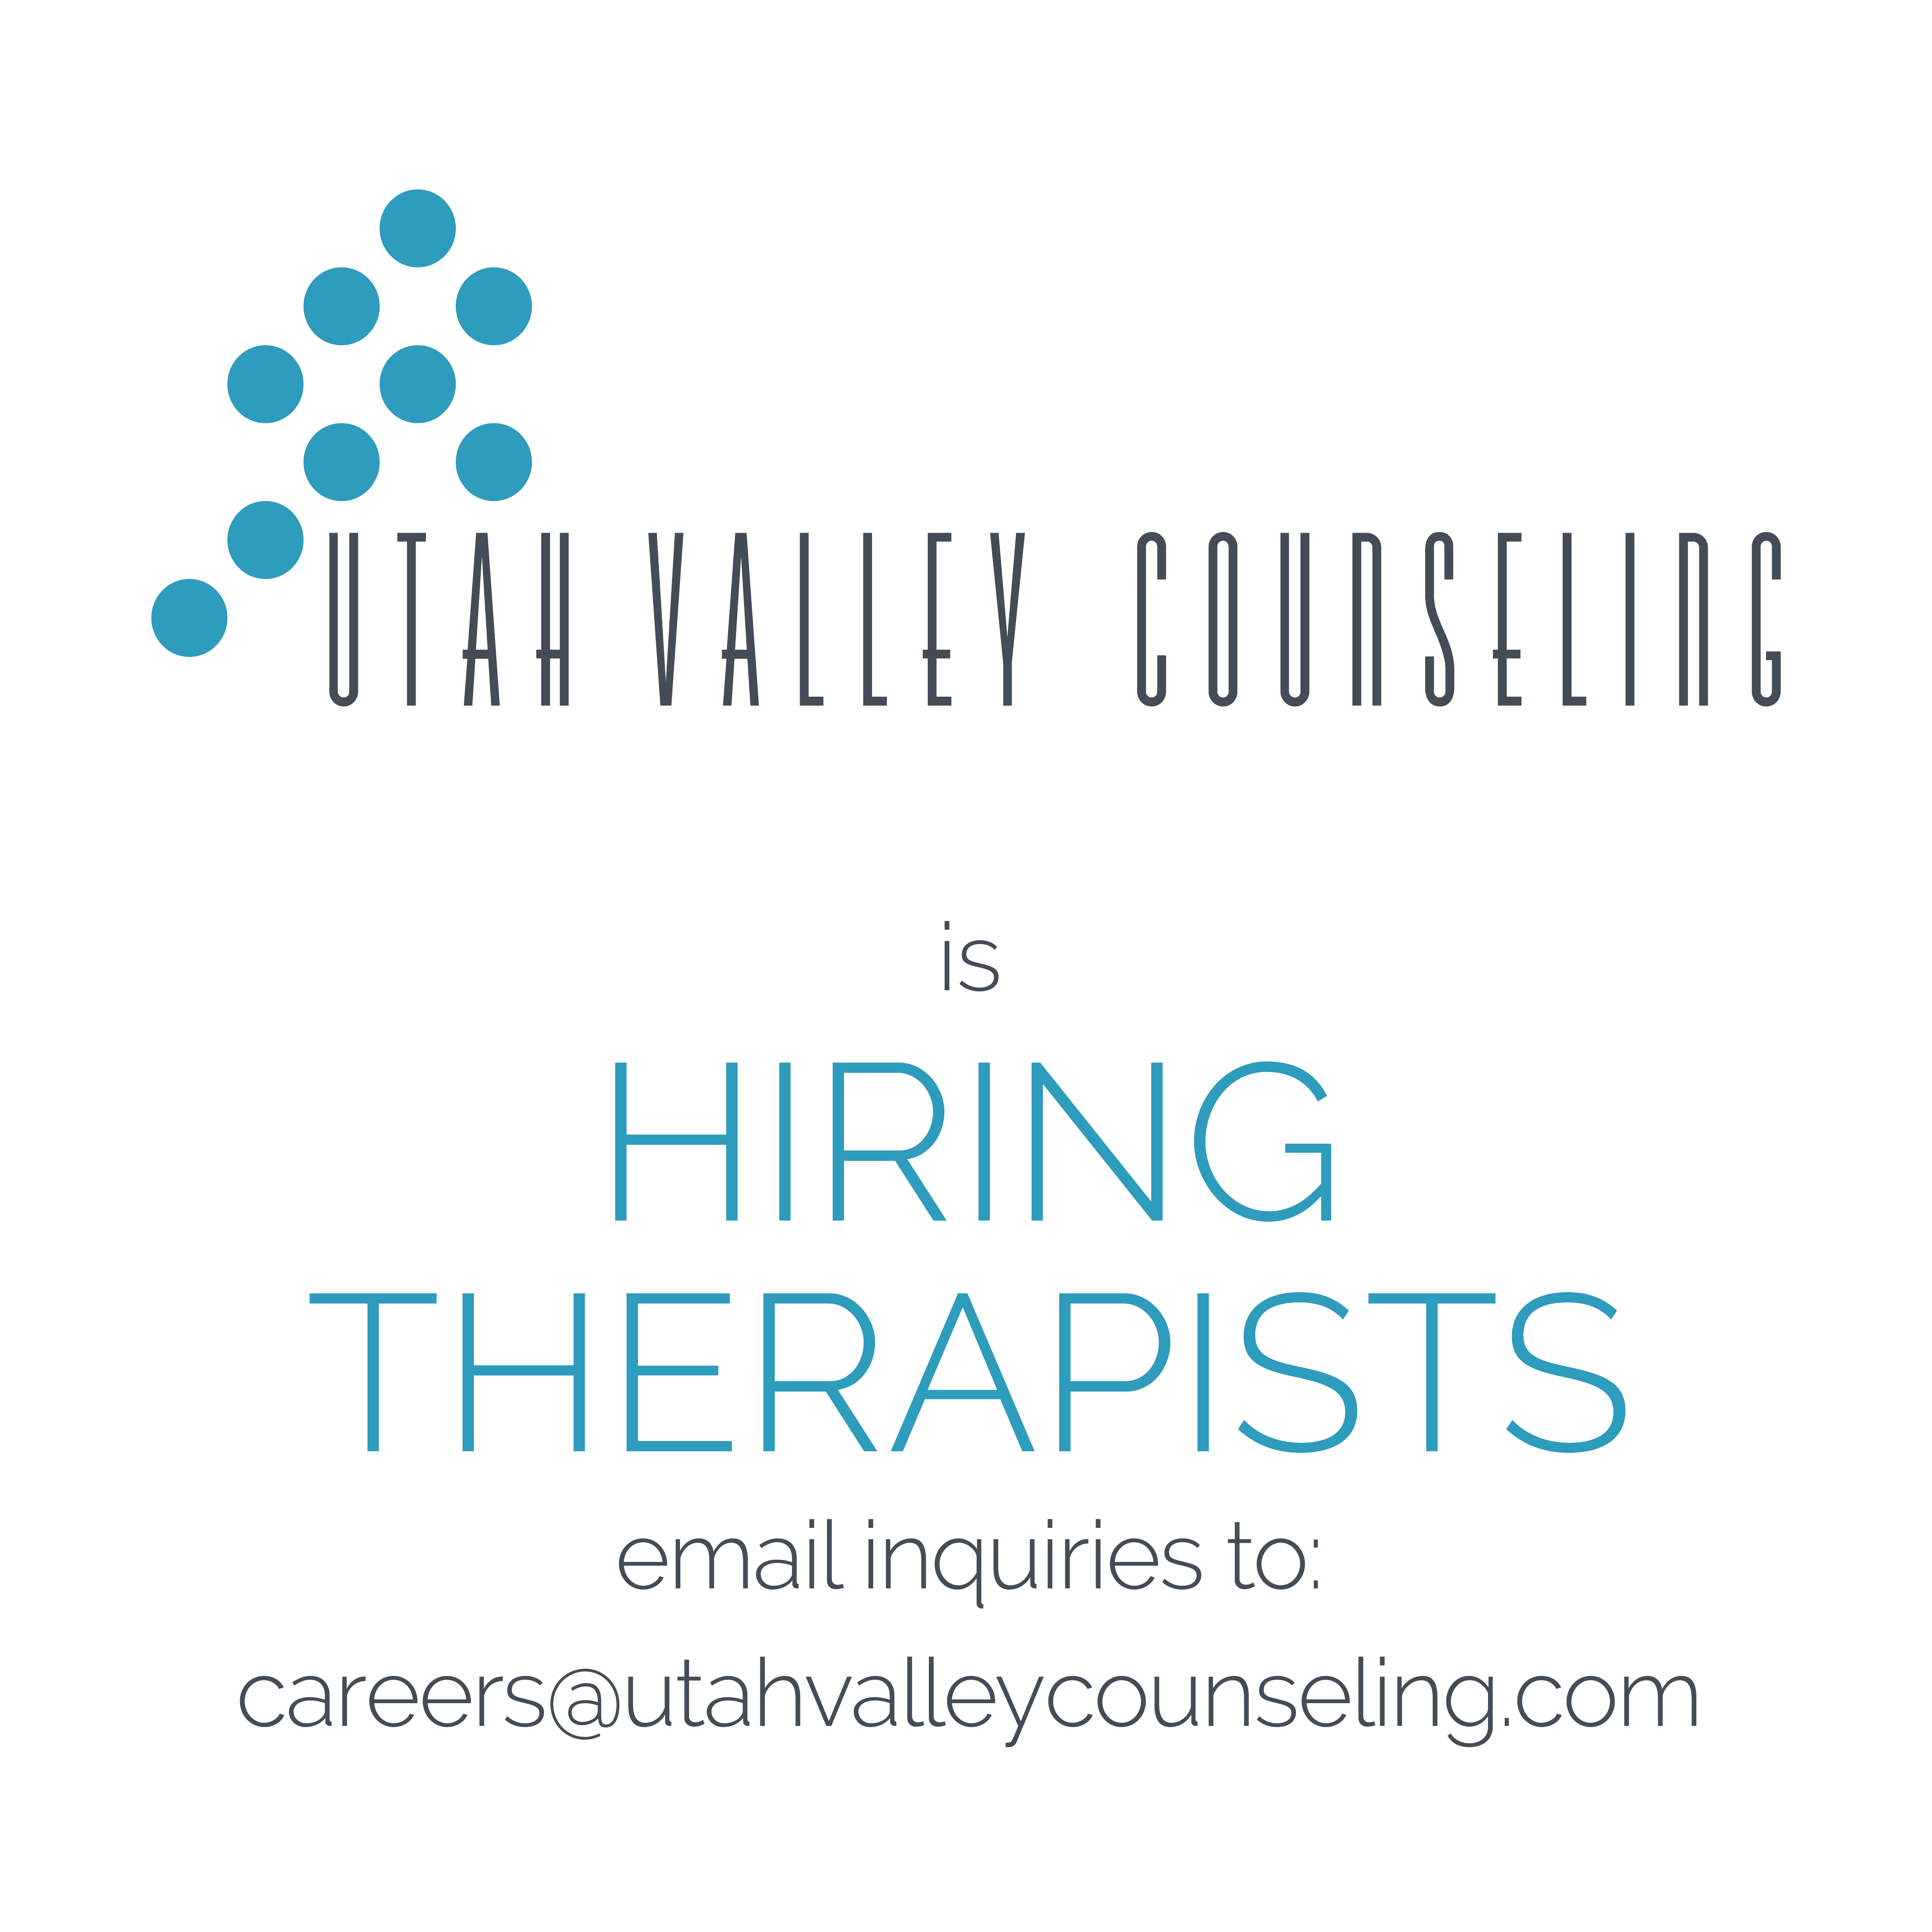 Hiring-Therapists-Utah-Valley-Counseling